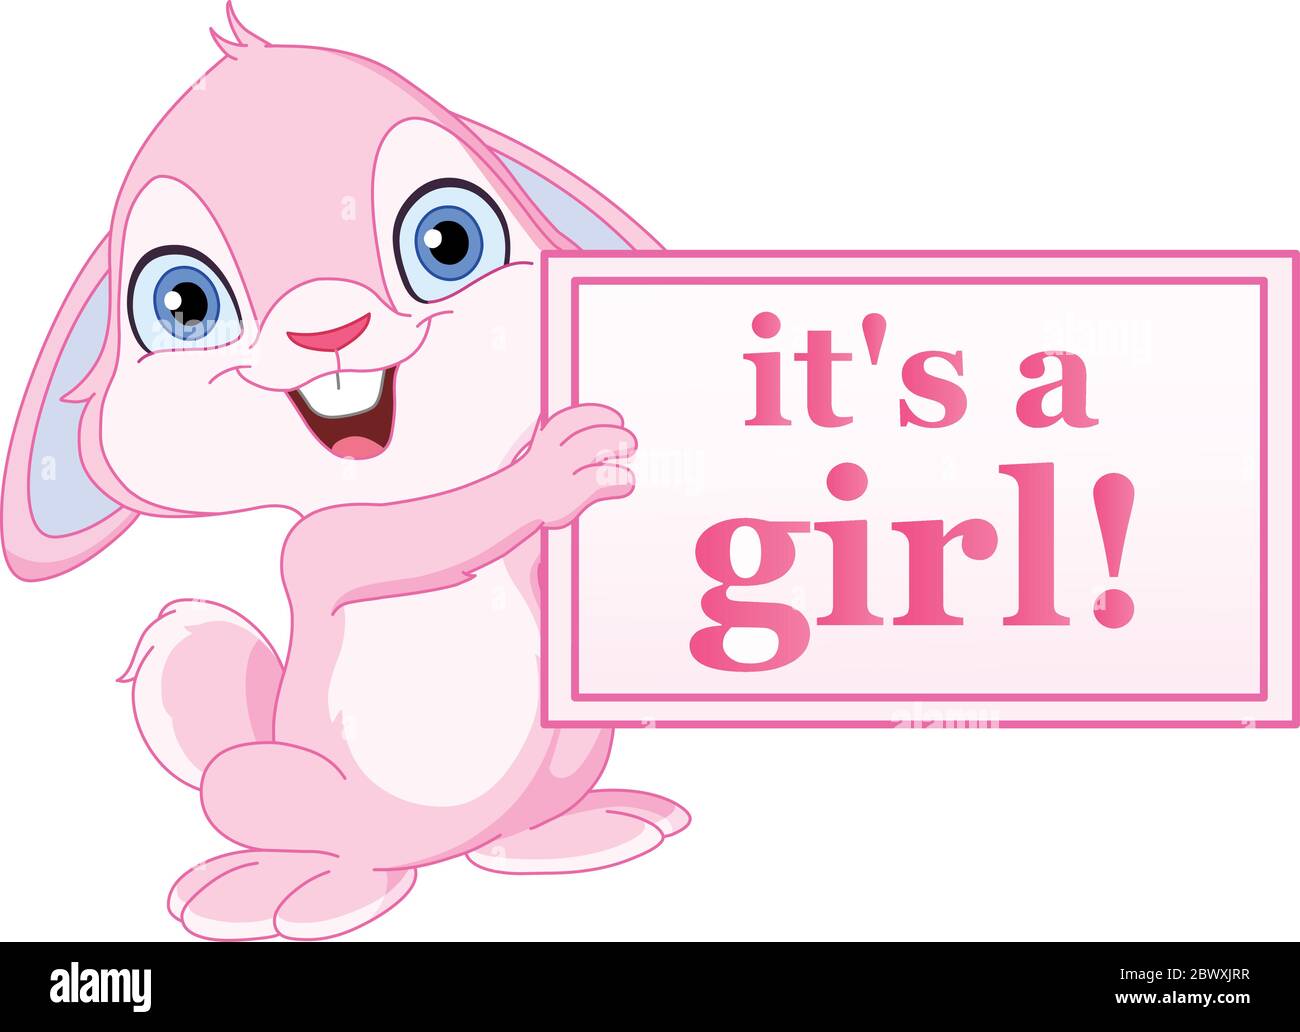 Baby bunny holding it’s a girl sign Stock Vector